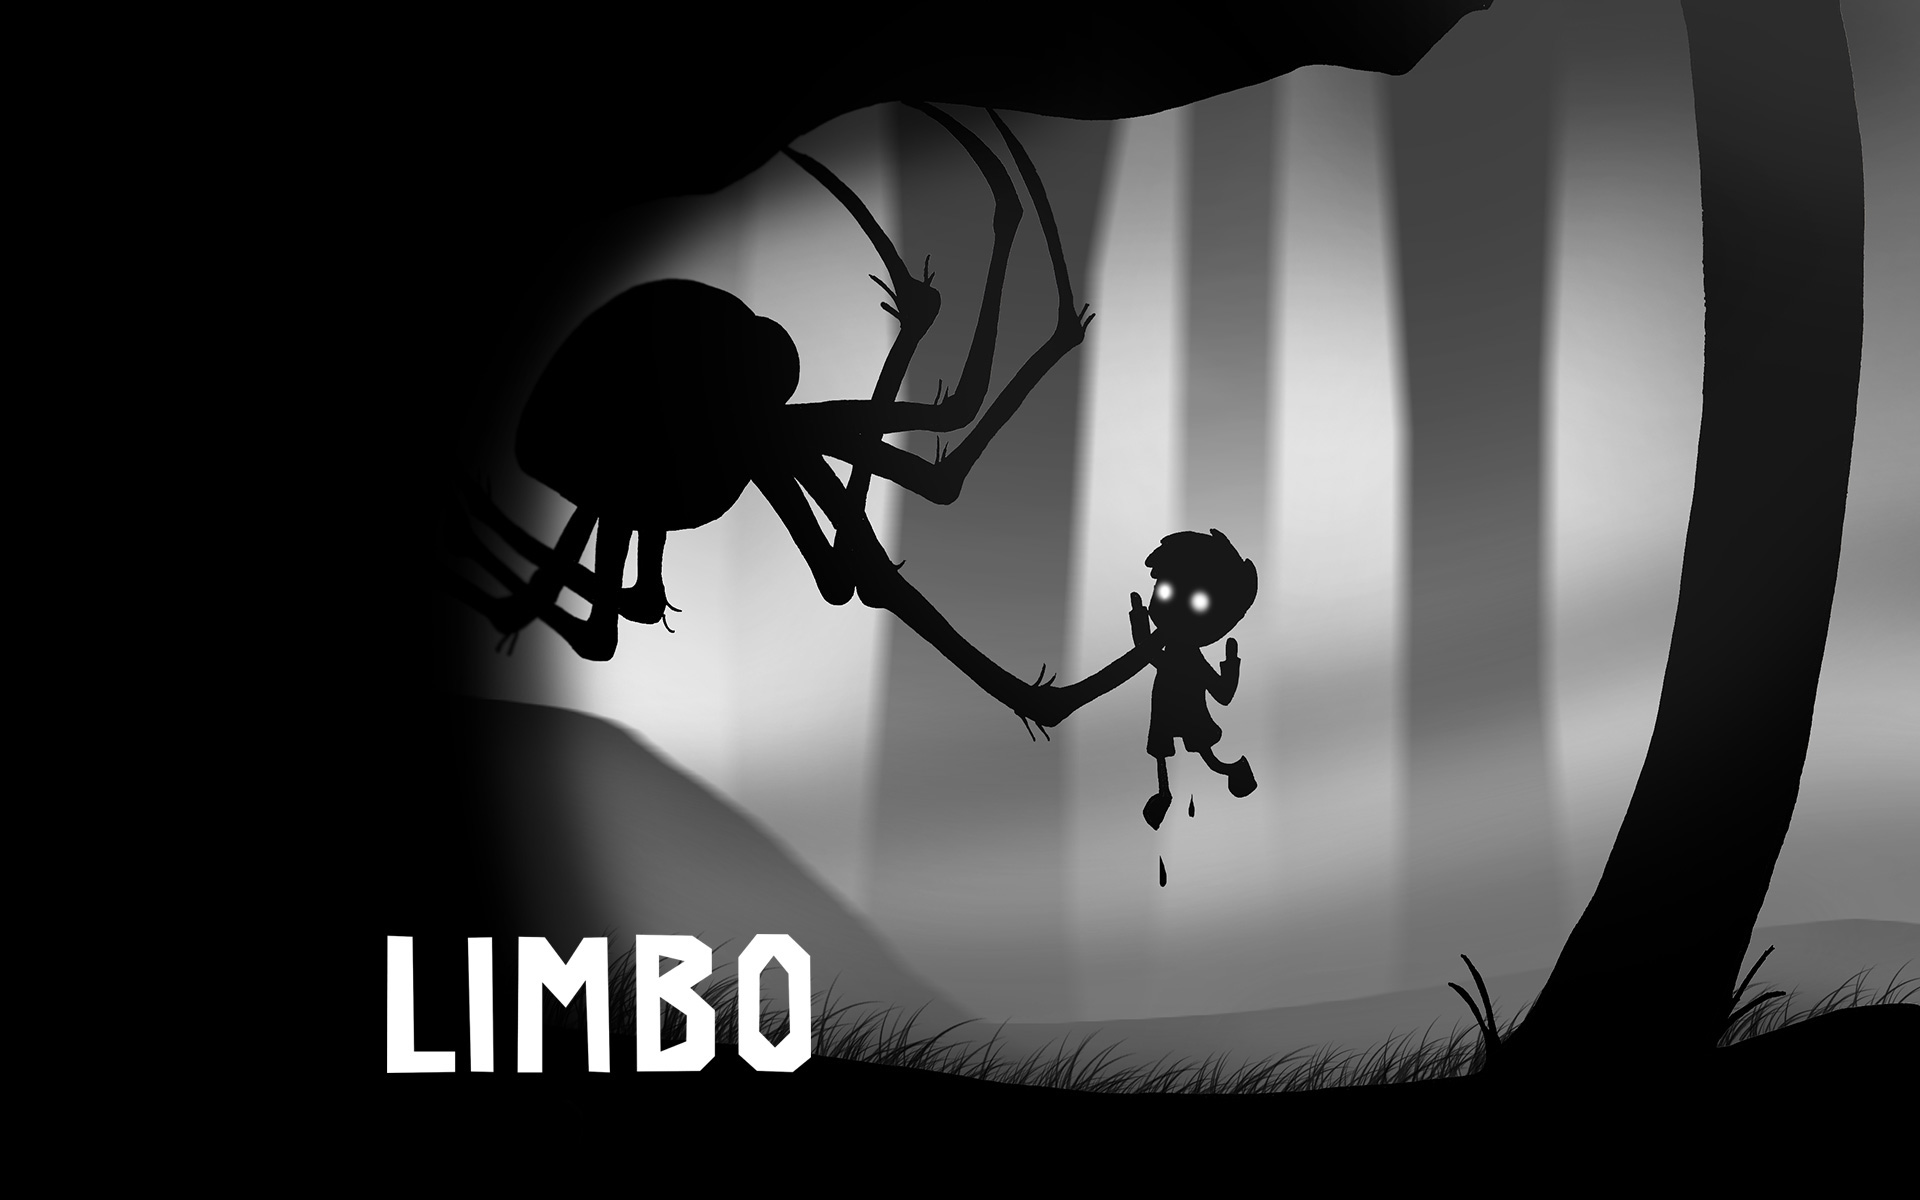 Limbo’s focus on silhouettes creates a dark and foreboding atmosphere